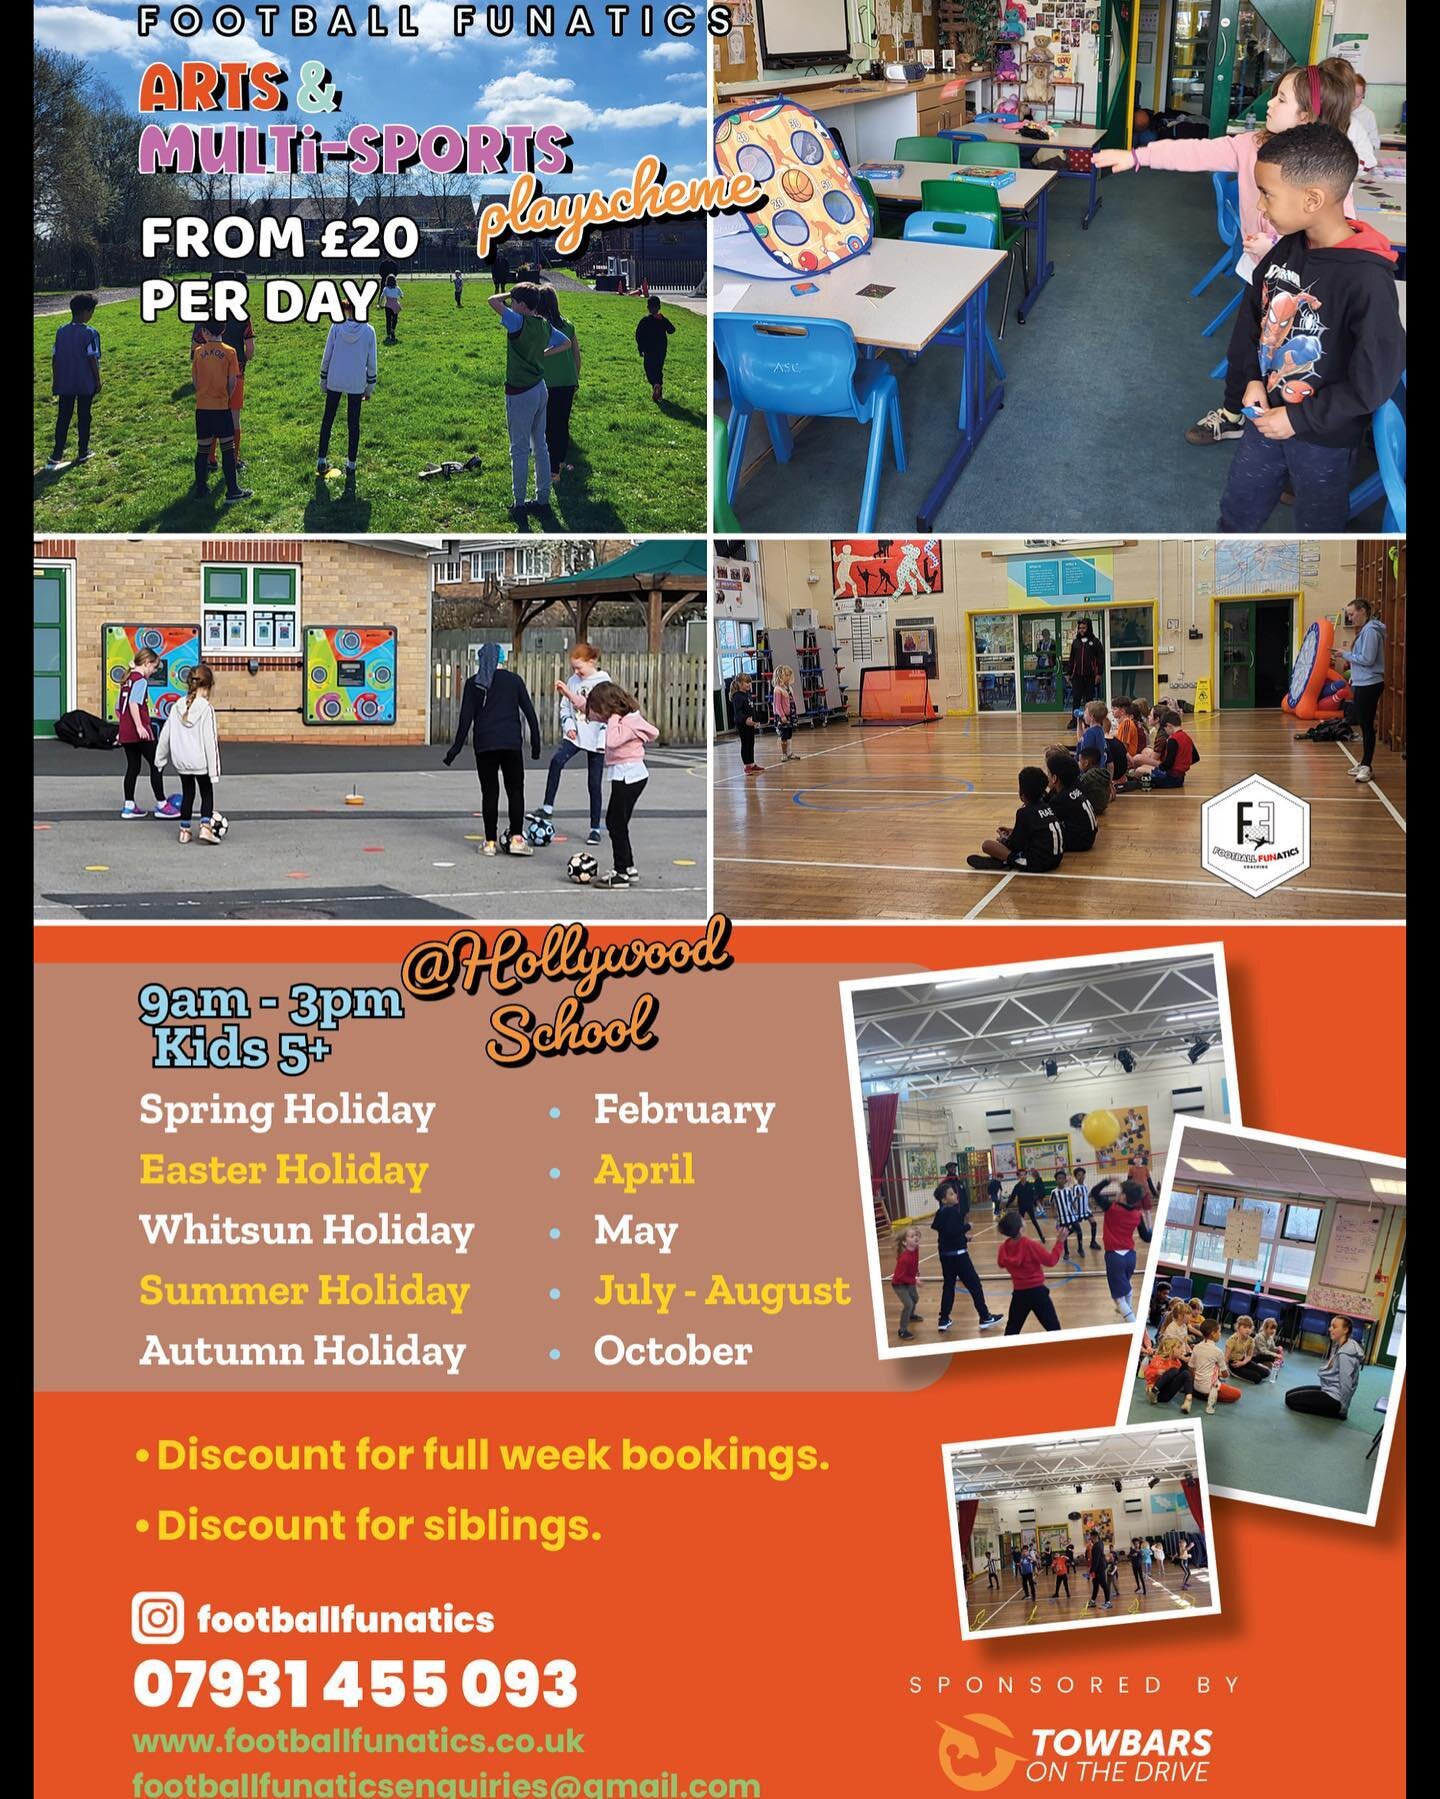 Football Funatics have got you sorted for the May half term with TWO different venues!!

You can find us at Hollywood Primary School for our Arts &amp; Multi-sports Playscheme🎭🎨
&amp;
Wheelers Lane Technology College for our football and sports cam